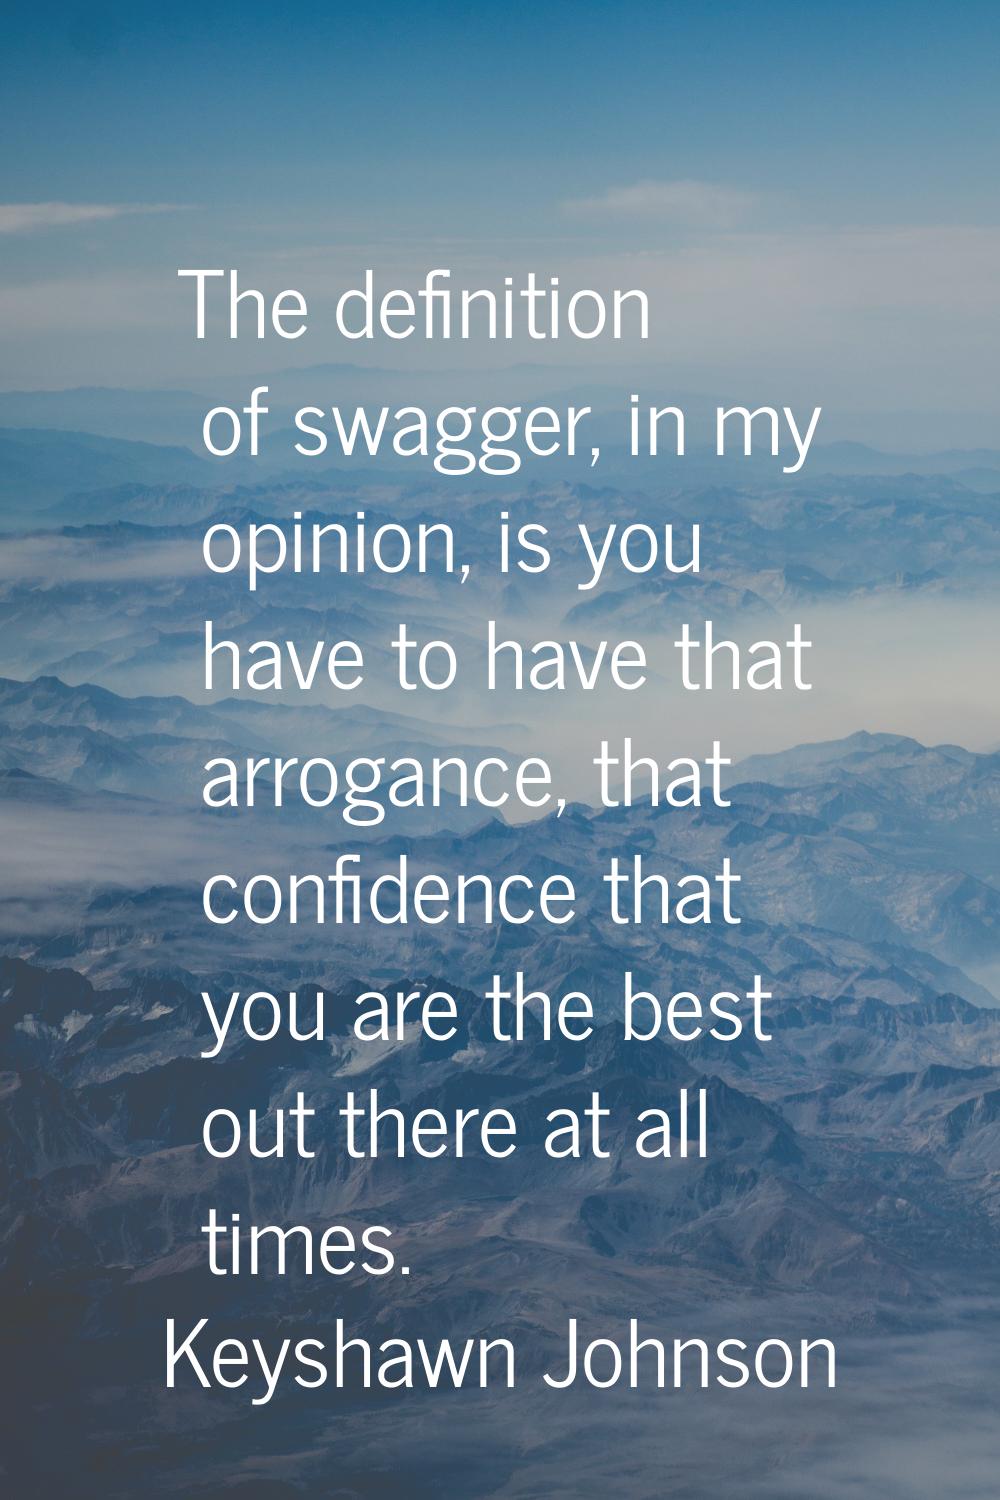 The definition of swagger, in my opinion, is you have to have that arrogance, that confidence that 